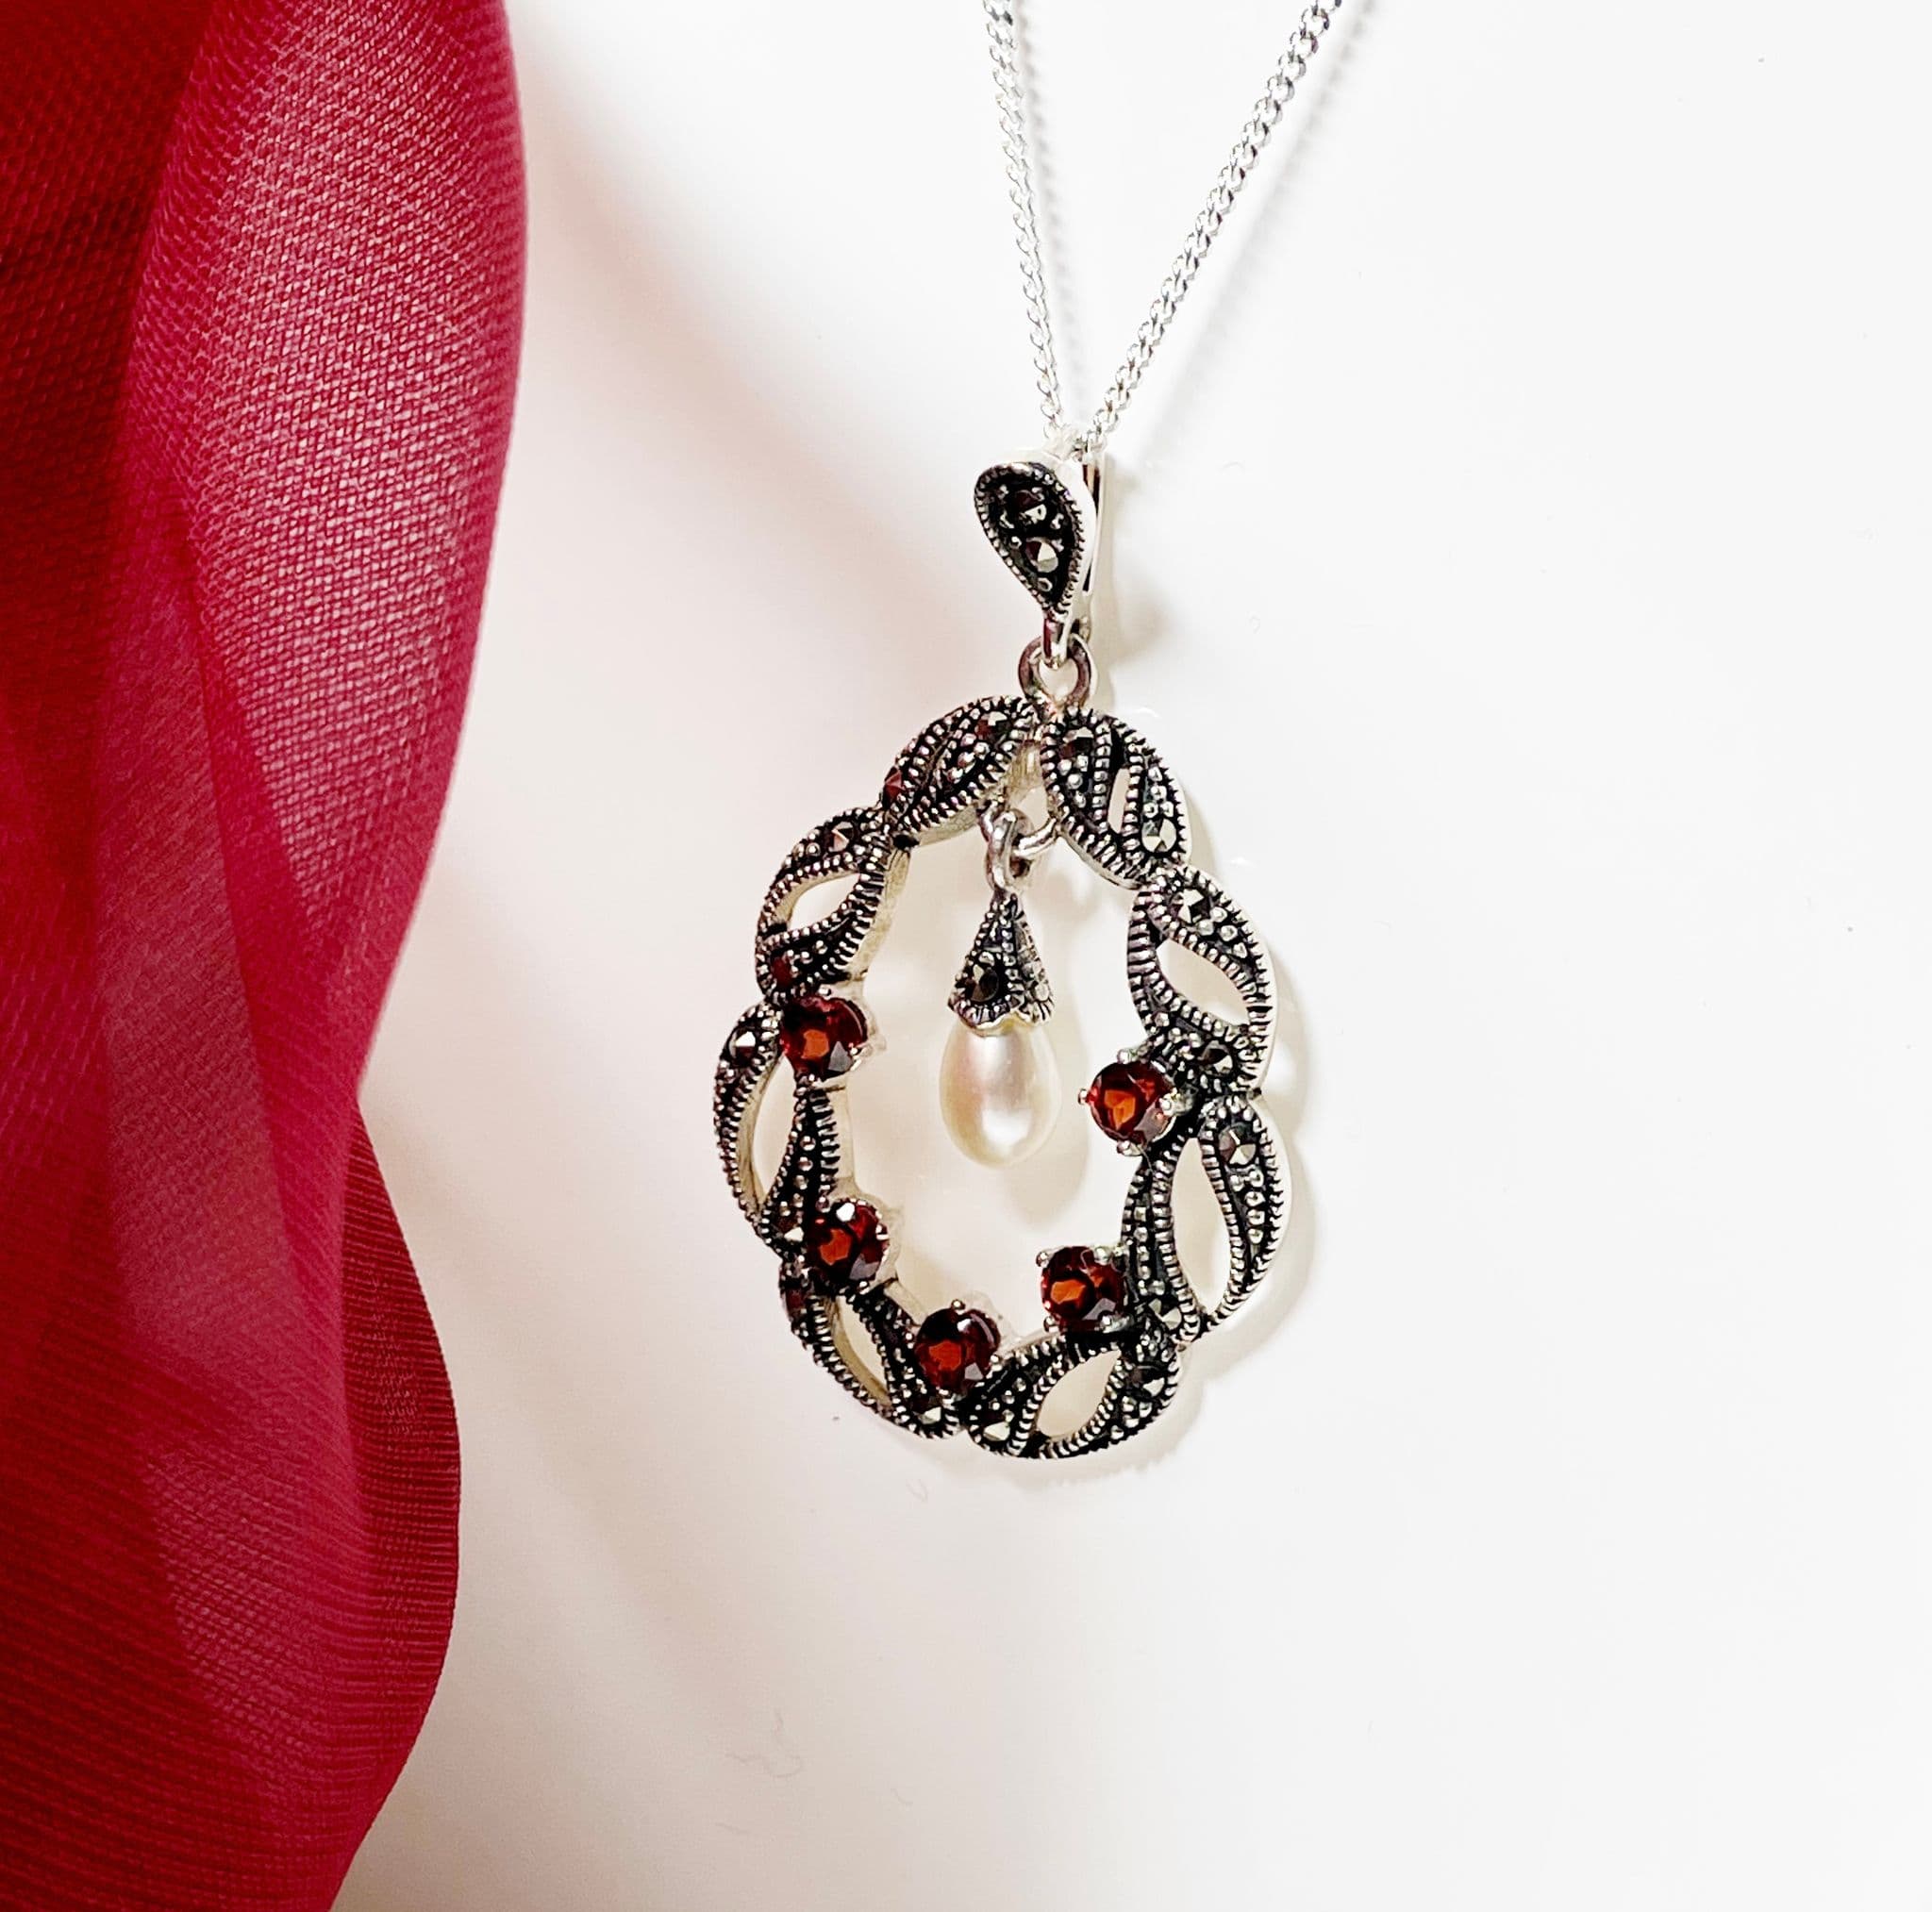 Garnet and silver necklace - TigerLily Jewellery